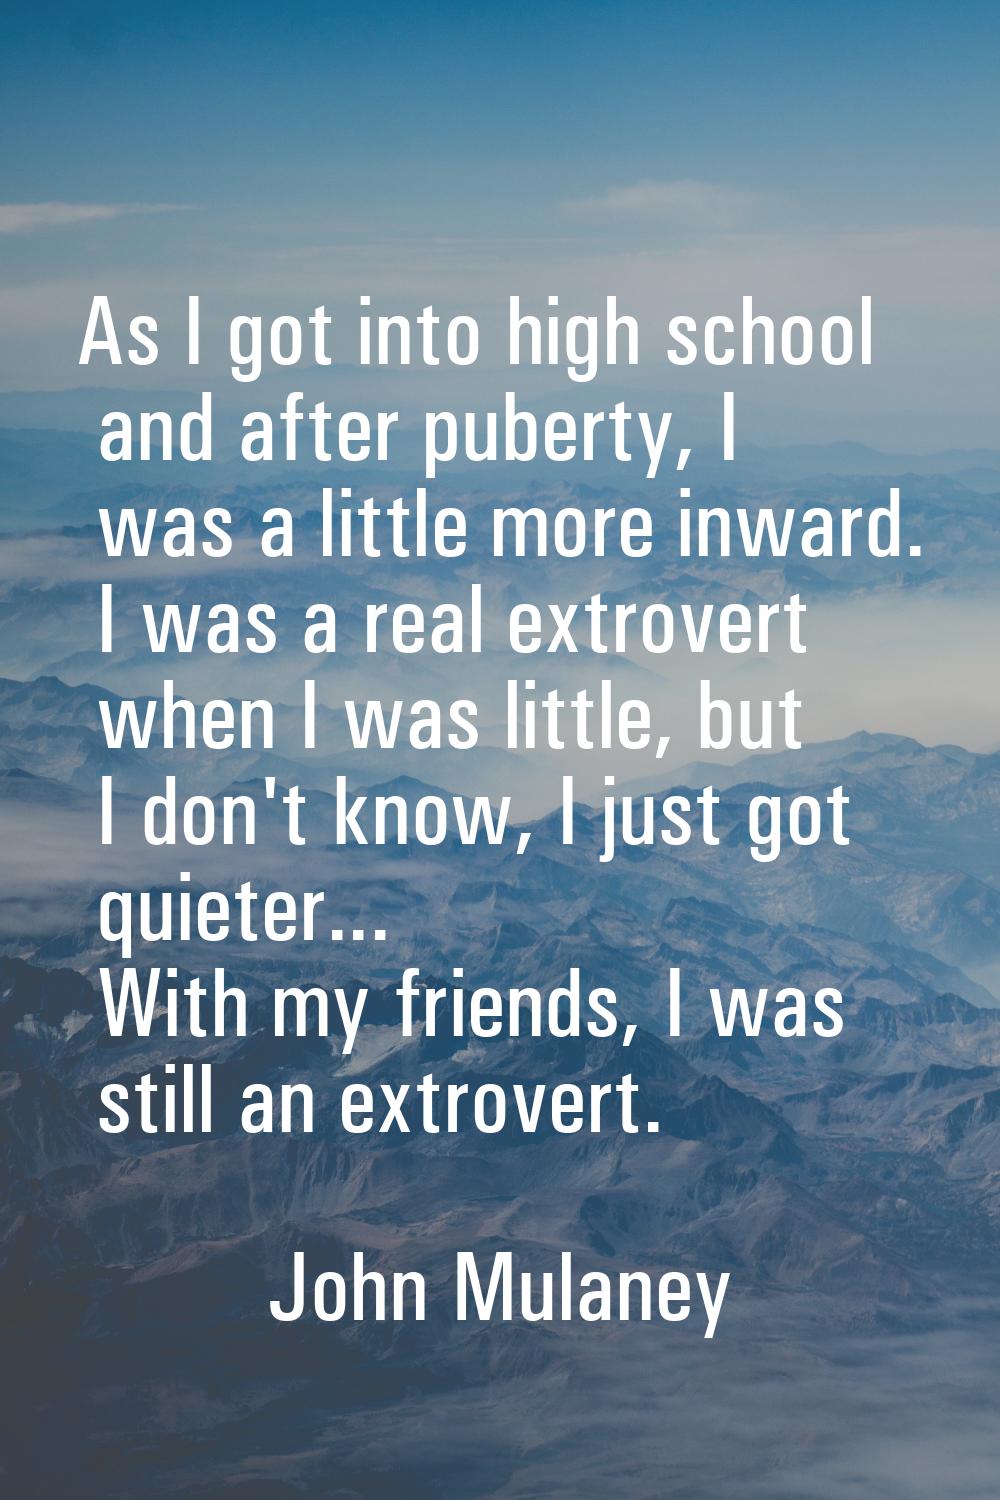 As I got into high school and after puberty, I was a little more inward. I was a real extrovert whe